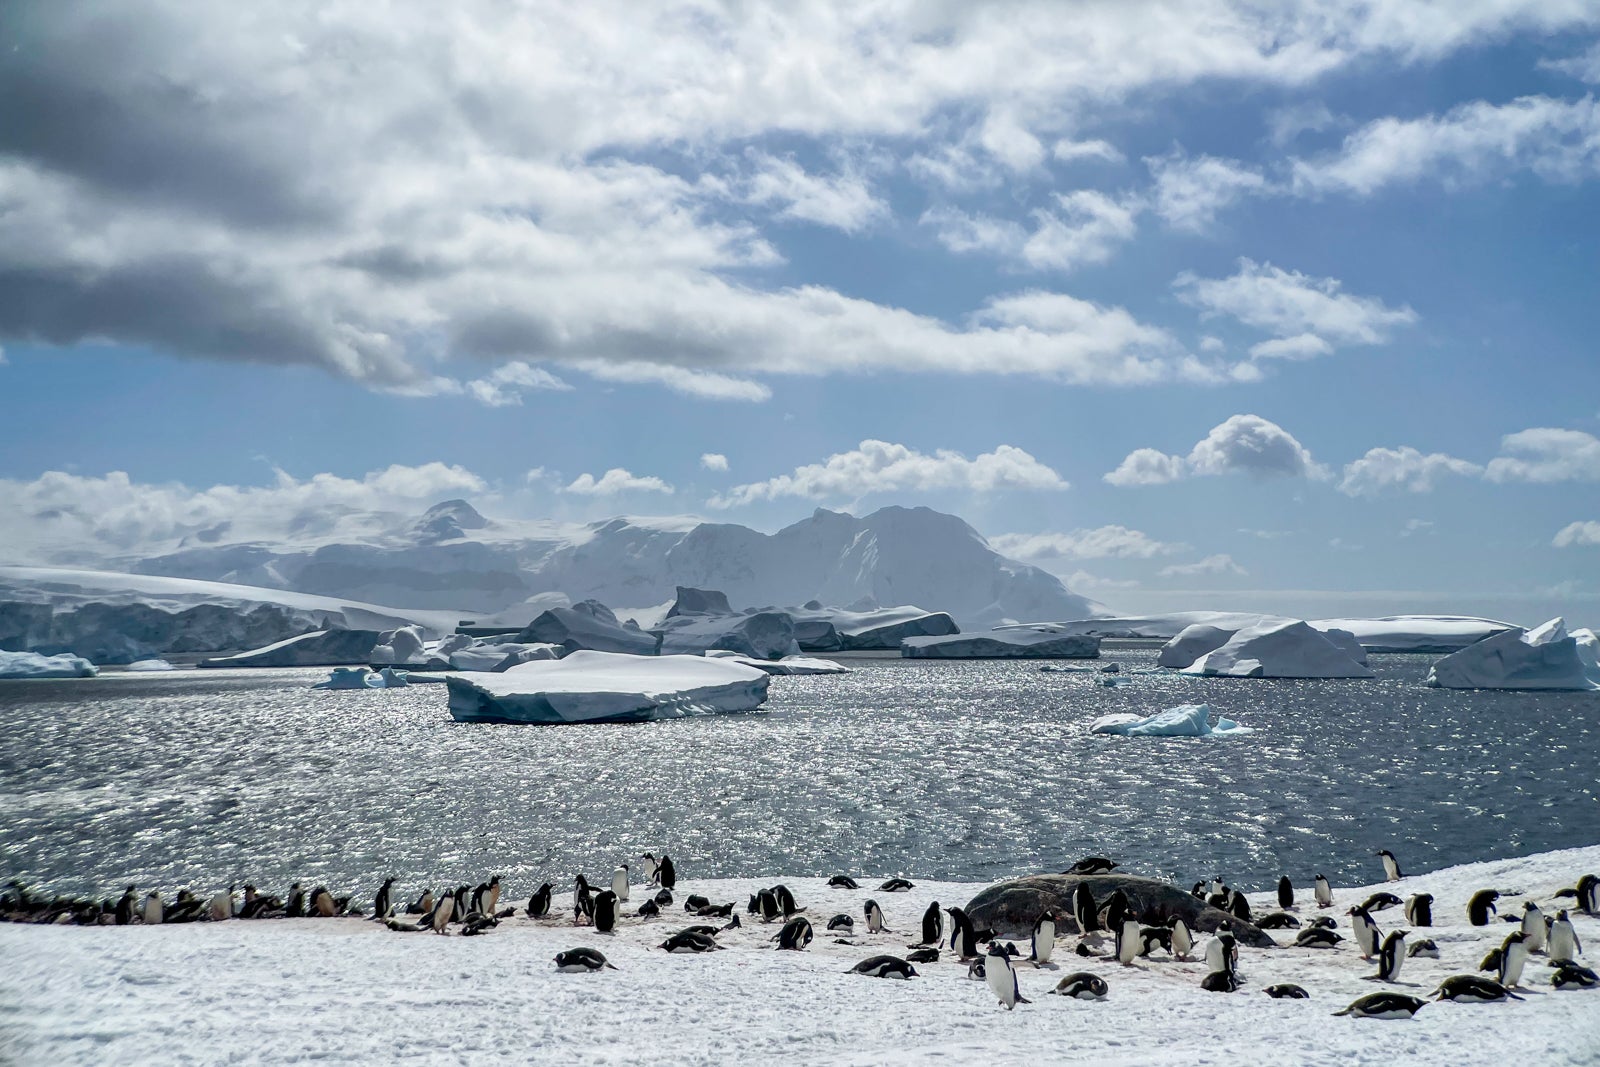 Antarctica gear guide: What you need to pack for a trip to the White Continent